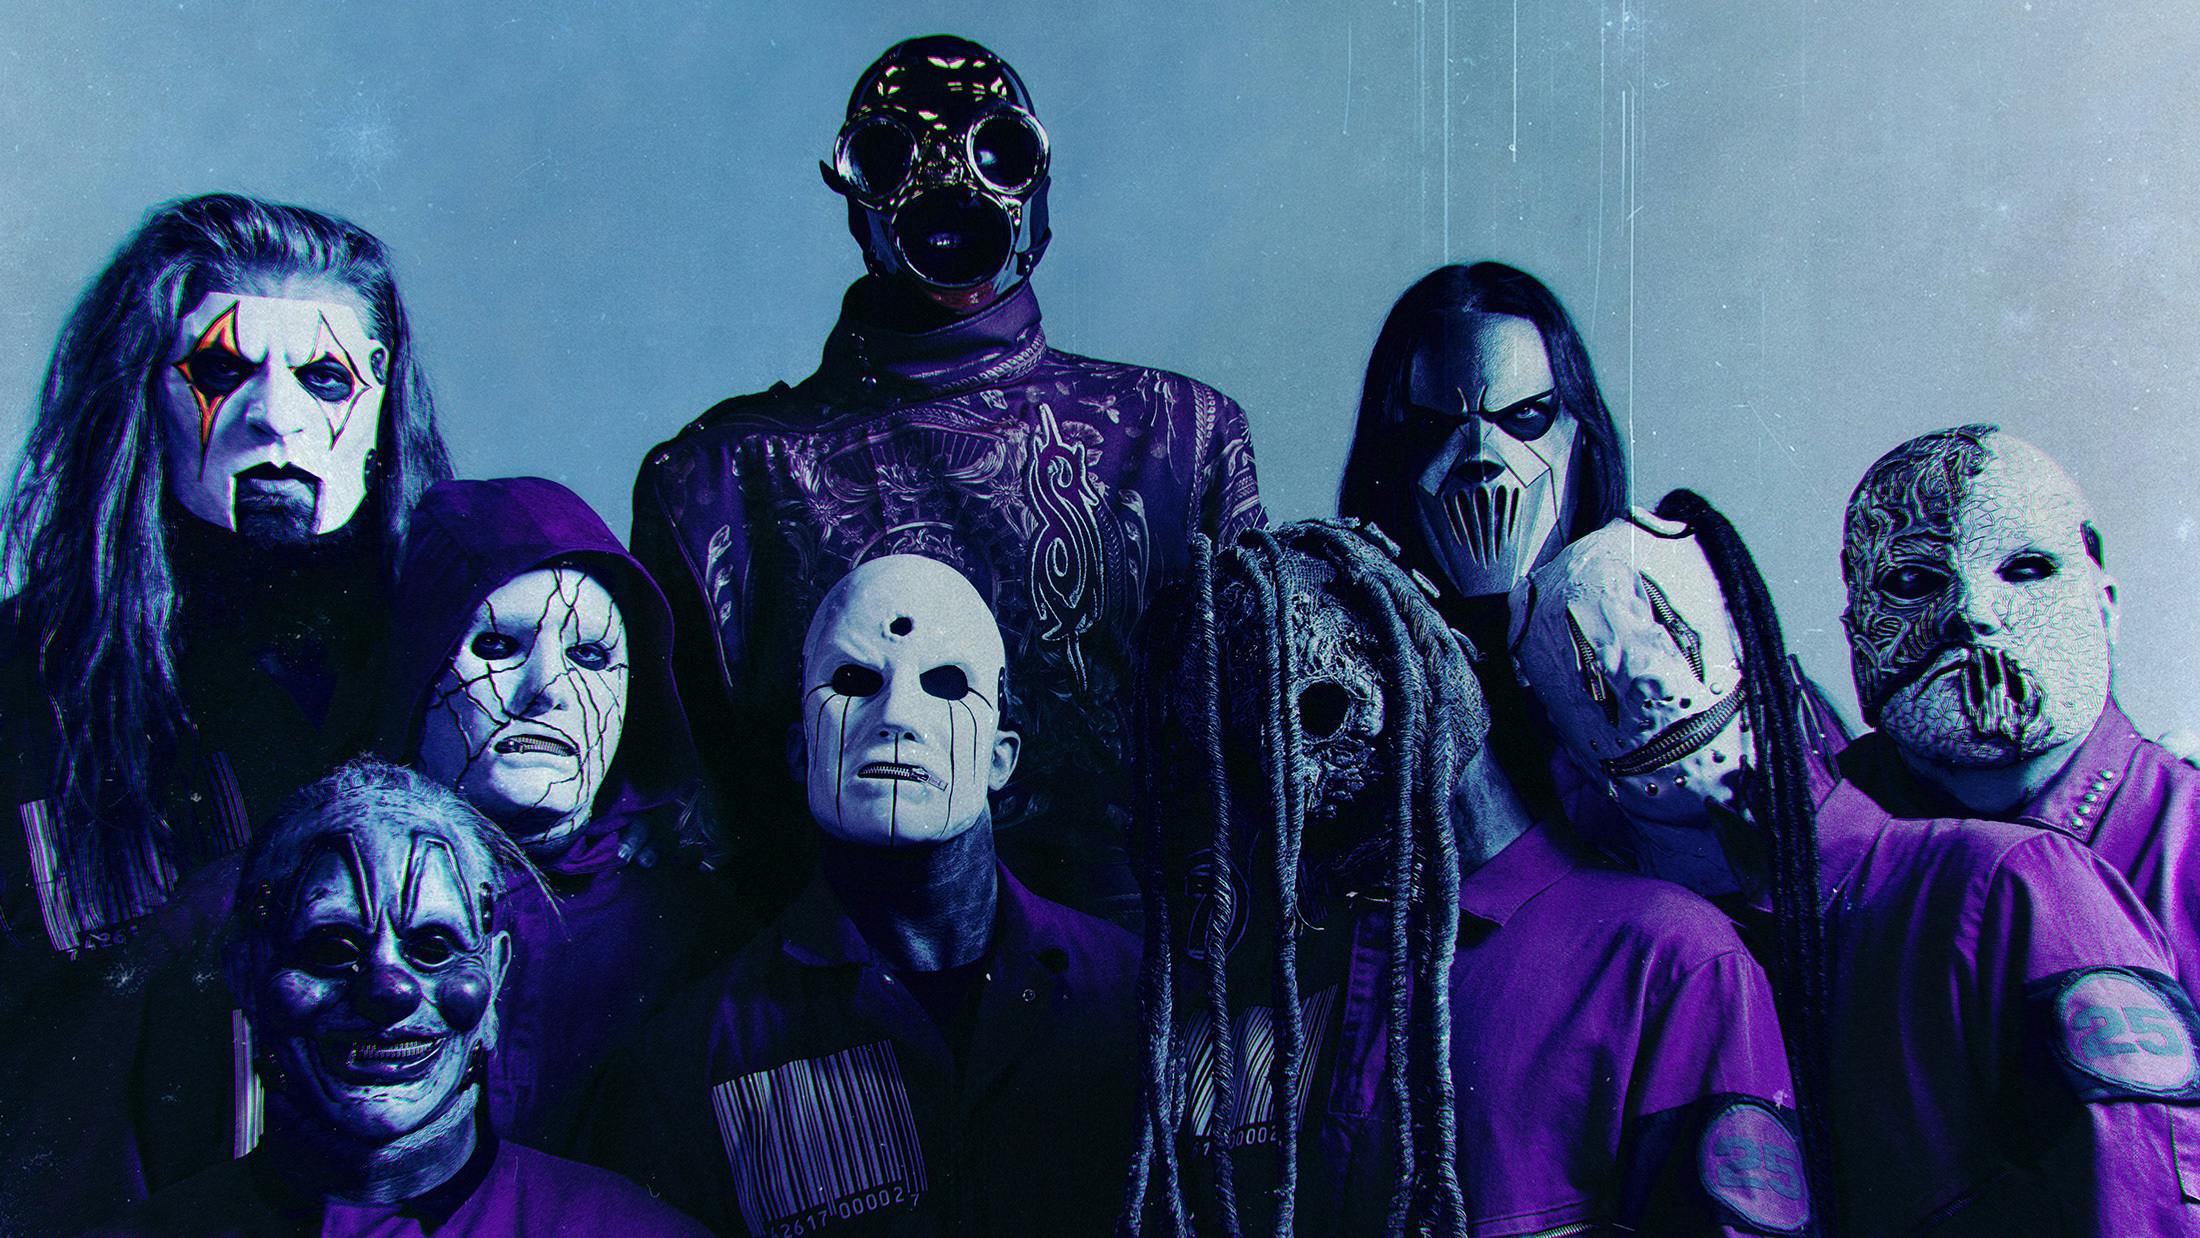 Slipknot announce U.S. tour with Knocked Loose, Orbit Culture and Vended